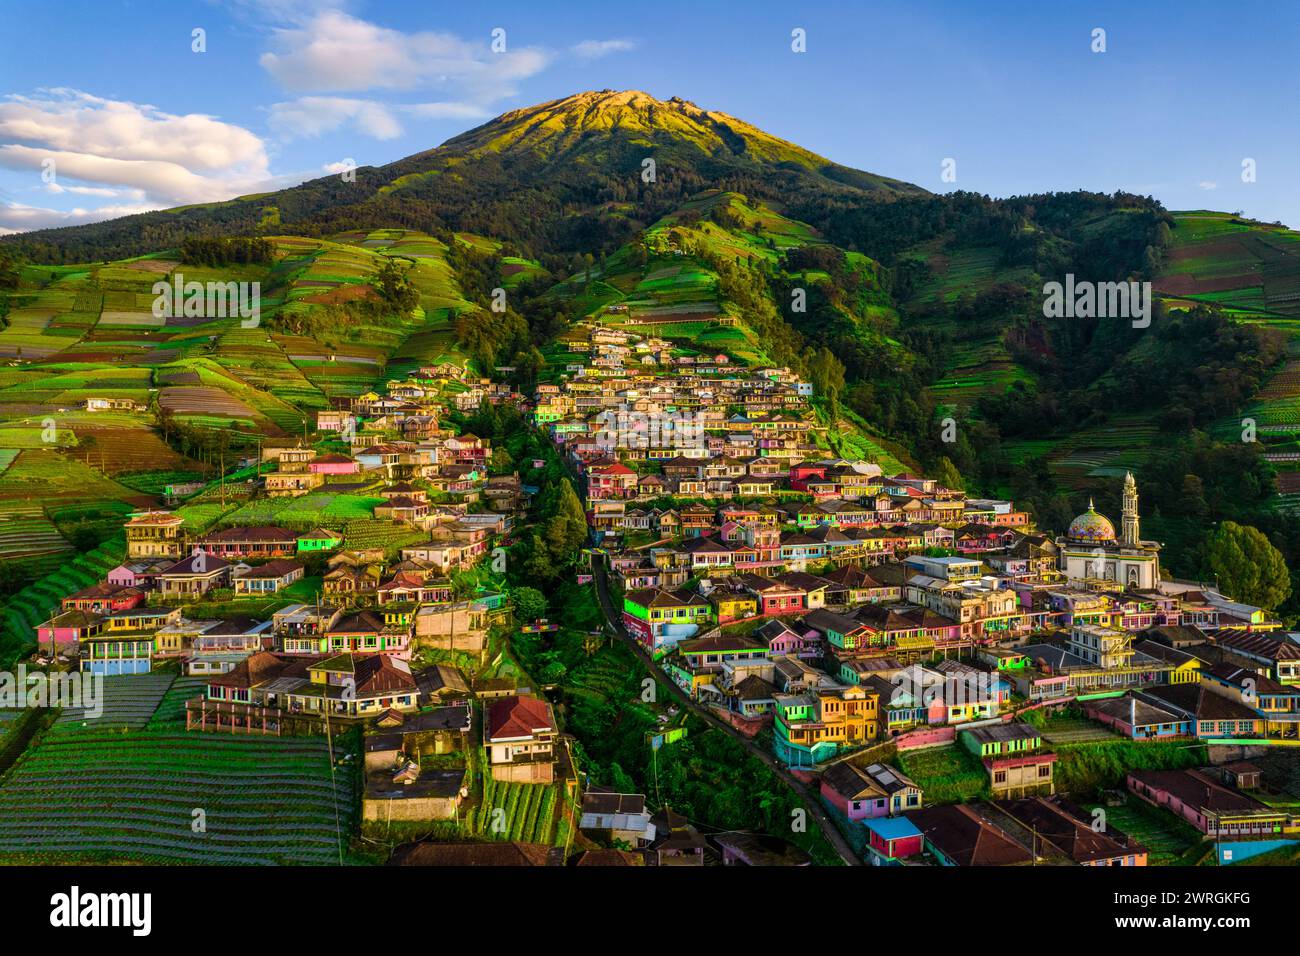 Butuh Village on mountain hillside, Magelang, Central Java, Indonesia Stock Photo